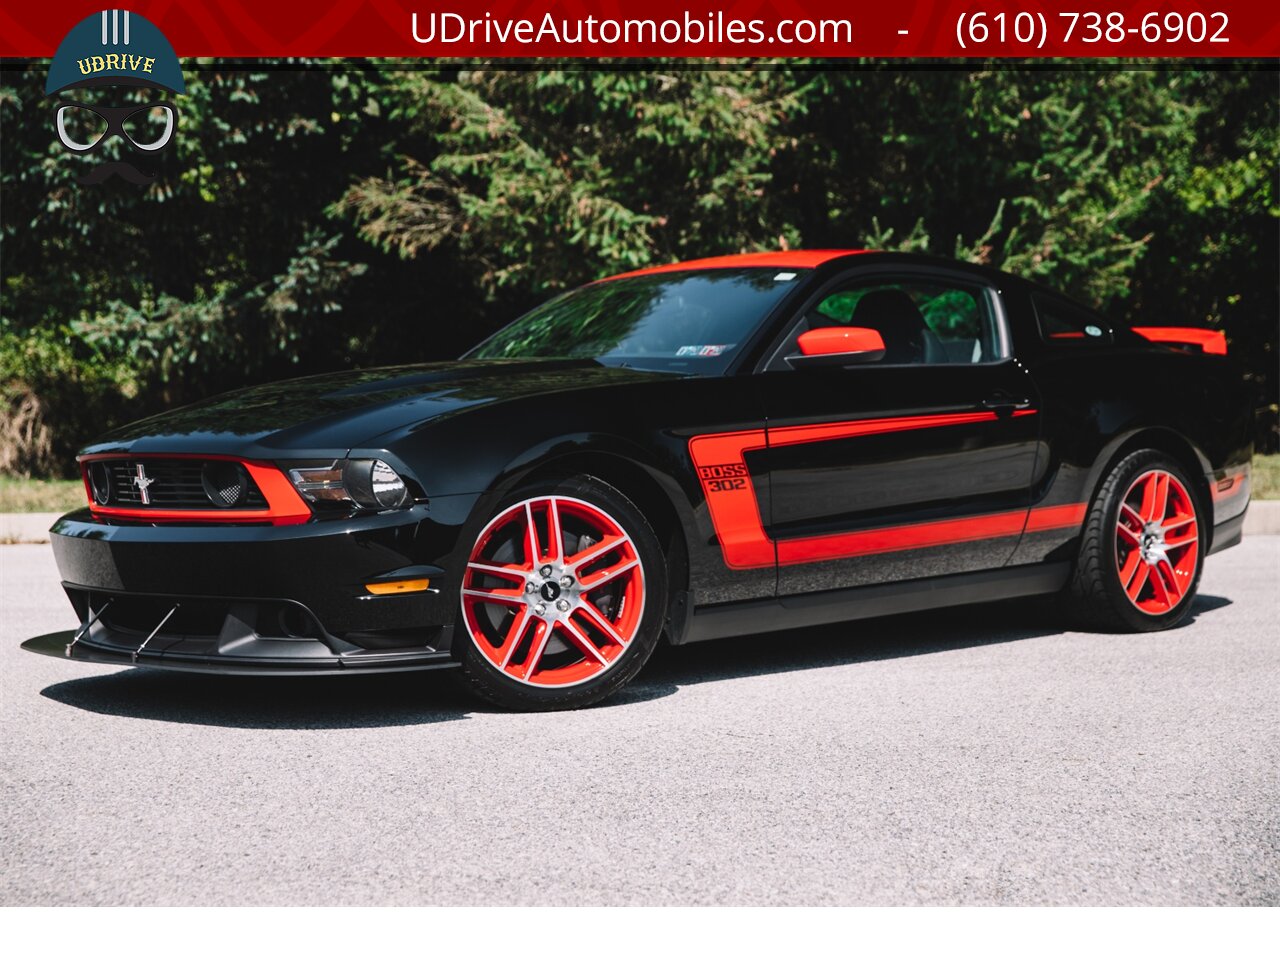 2012 Ford Mustang 866 Miles Boss 302 Laguna Seca #338 of 750  Red TracKey Activated - Photo 1 - West Chester, PA 19382